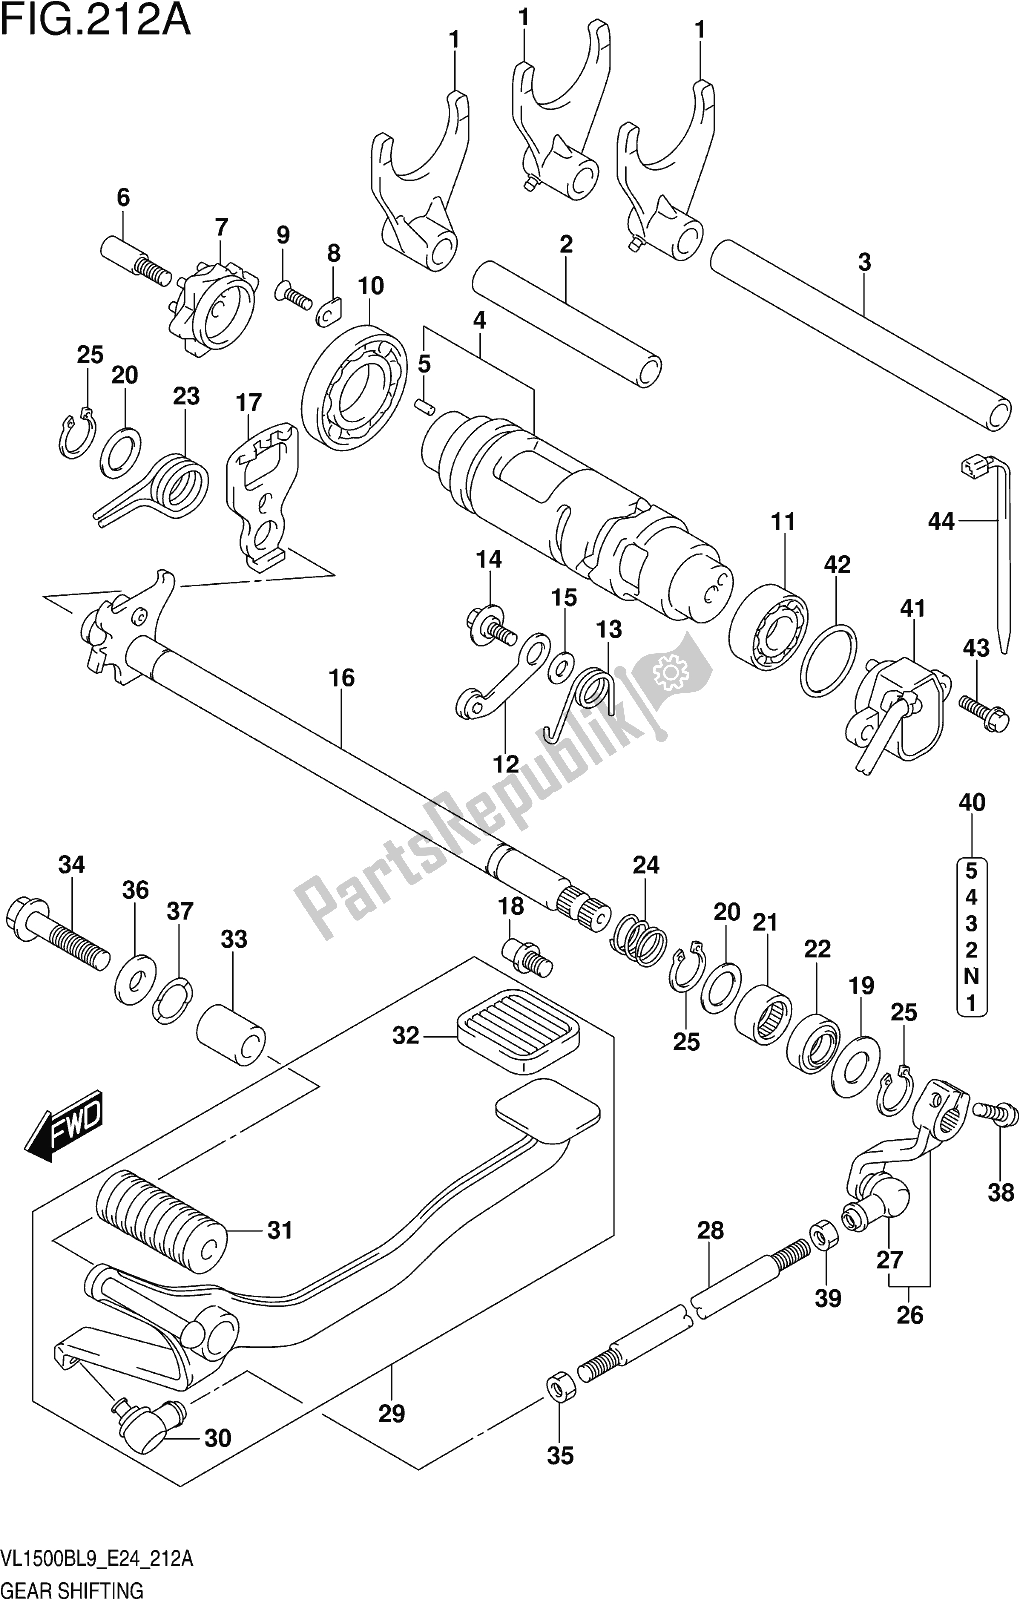 All parts for the Fig. 212a Gear Shifting of the Suzuki VL 1500B 2019